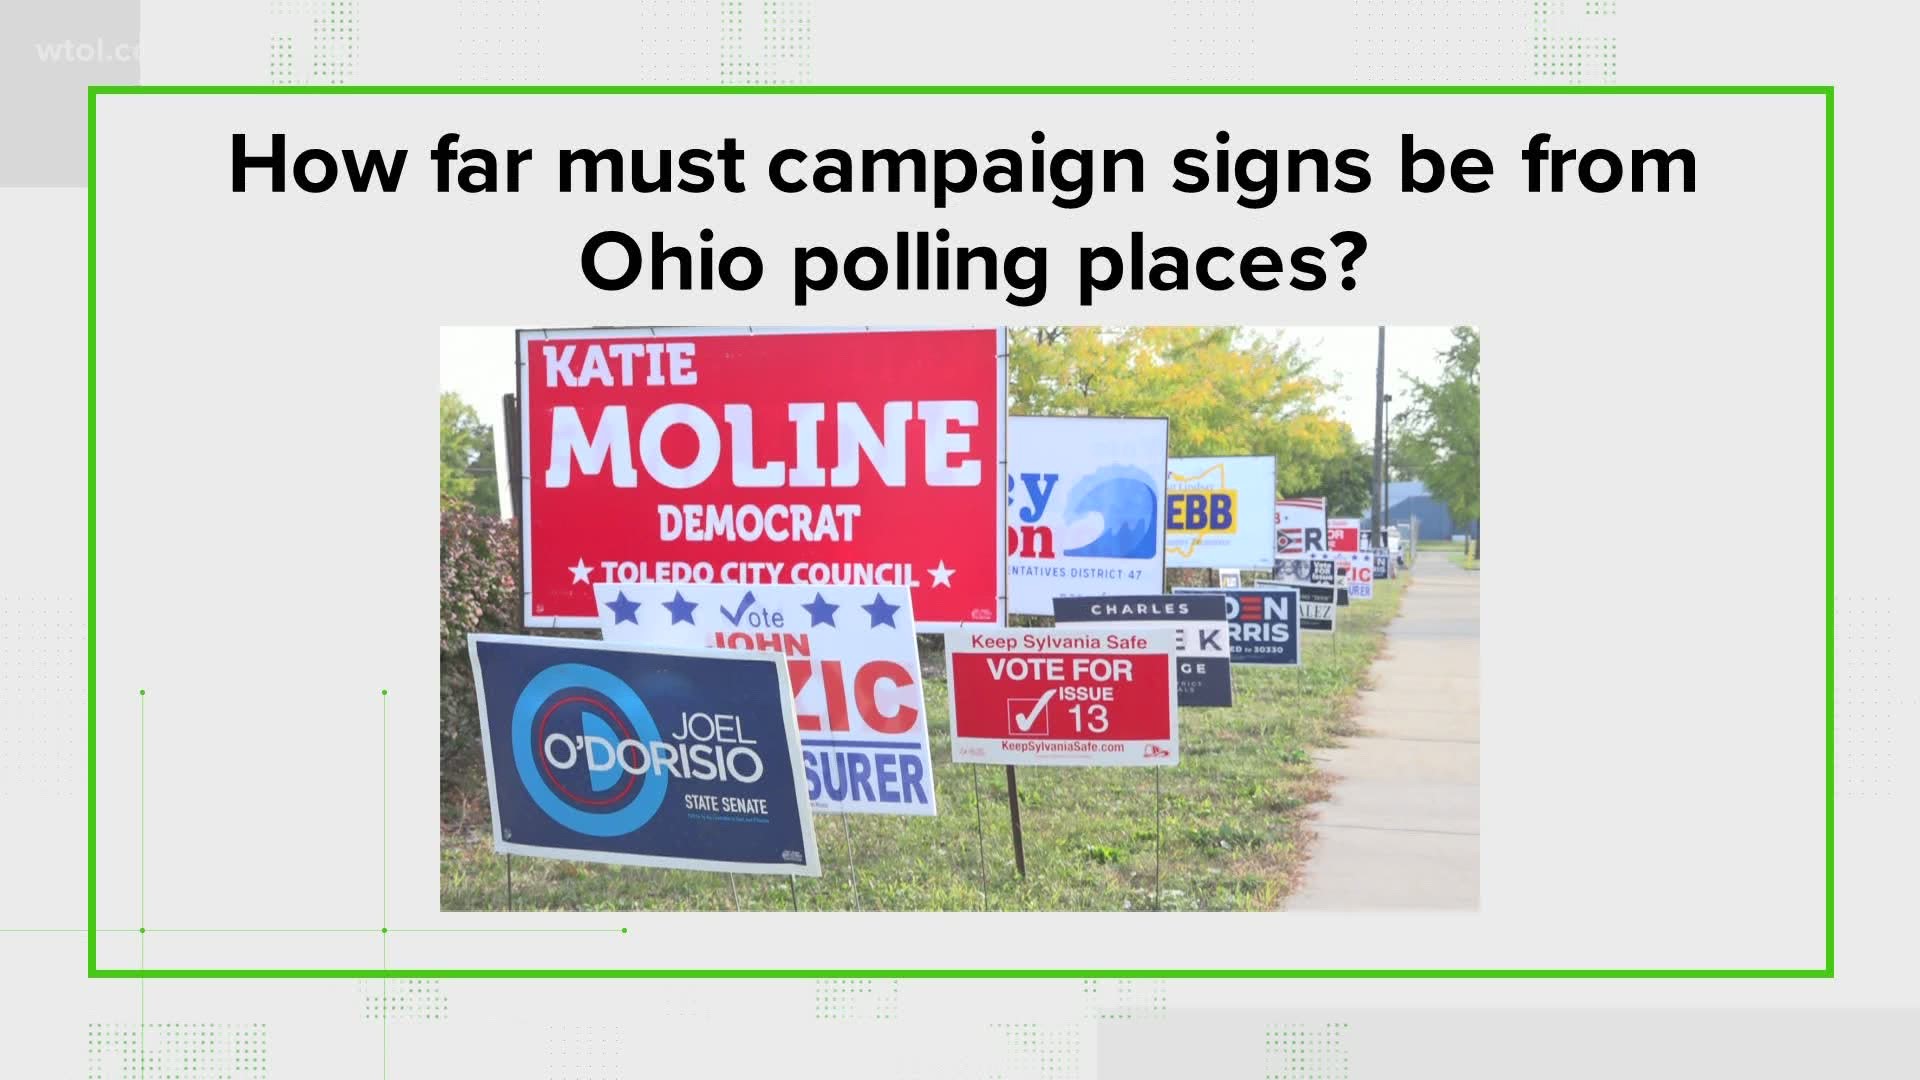 Campaigners must stay at least 100 feet from Ohio polling places